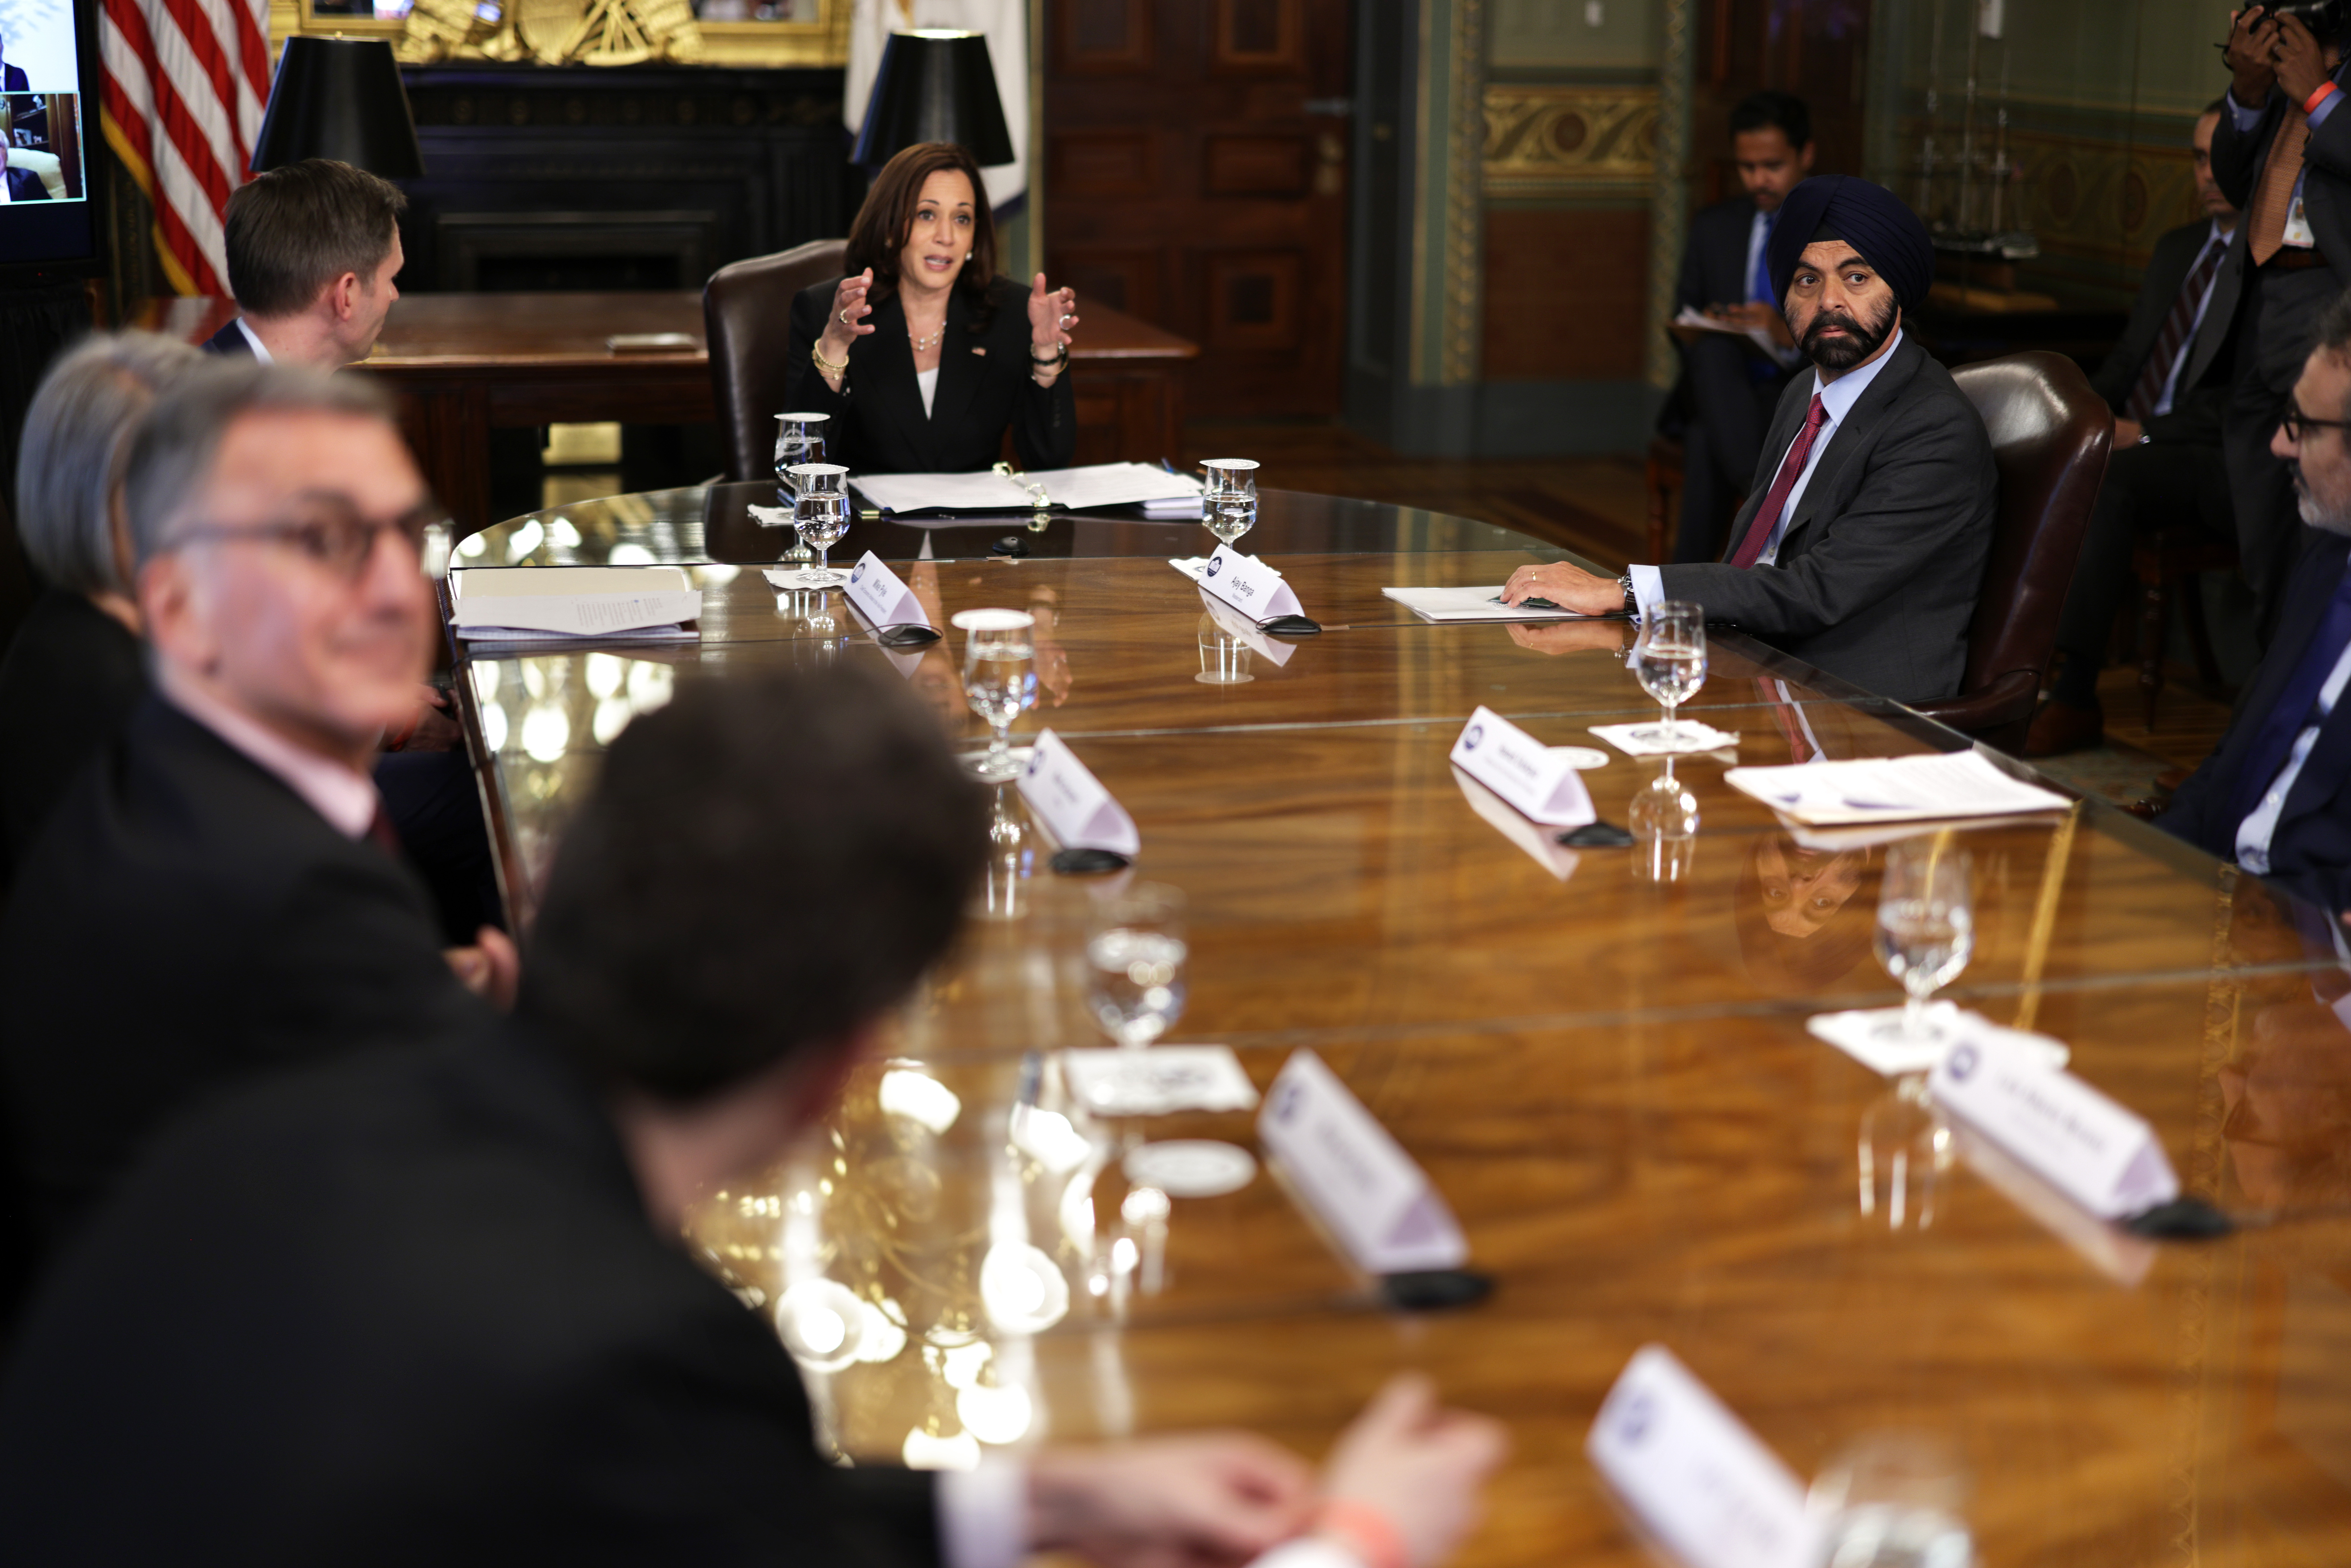 WASHINGTON, DC - MAY 27: U.S. Vice President Kamala Harris delivers opening remarks during a meeting with top business leaders, including Executive Chairman of Mastercard Ajay Banga (R) on the Northern Triangle in Central America, at the Vice President’s Ceremony Office at Eisenhower Executive Office Building May 27, 2021 in Washington, DC. Vice President Harris held a meeting with CEOs of the 12 companies and organizations that had announced commitments to support “inclusive economic development in the Northern Triangle” to discuss “strategy to address the root causes of migration by promoting economic opportunity.” (Photo by Alex Wong/Getty Images)